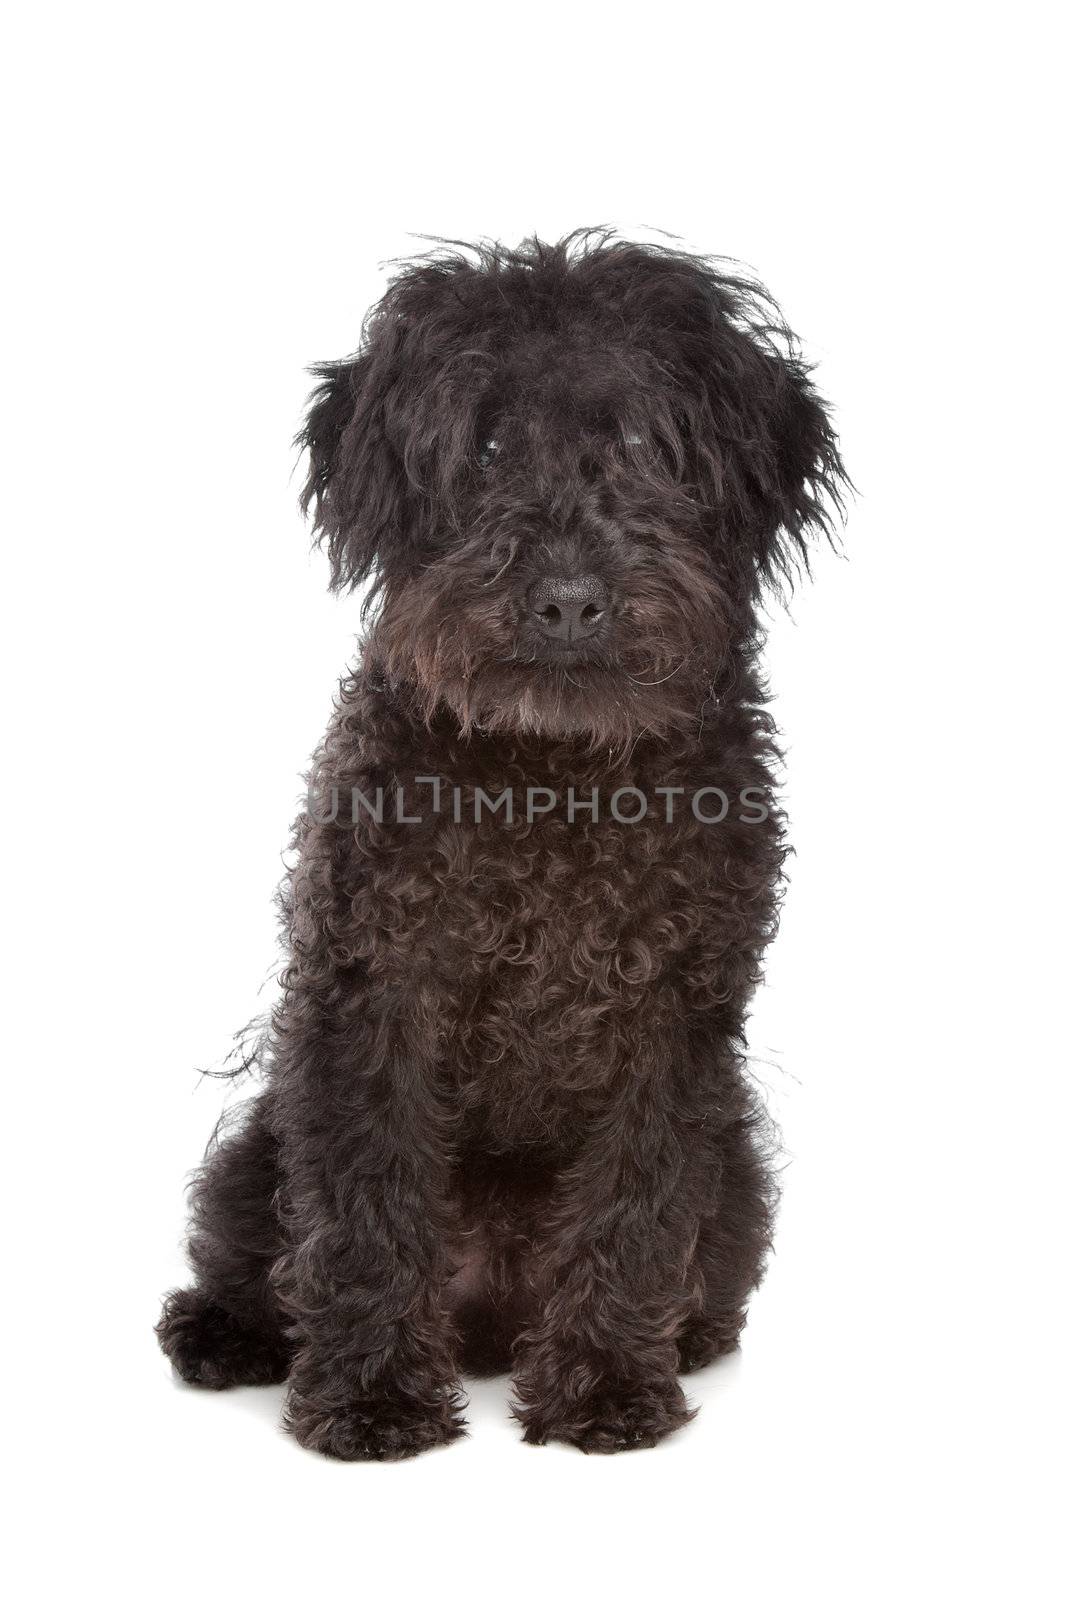 Labradoodle in front of a white background